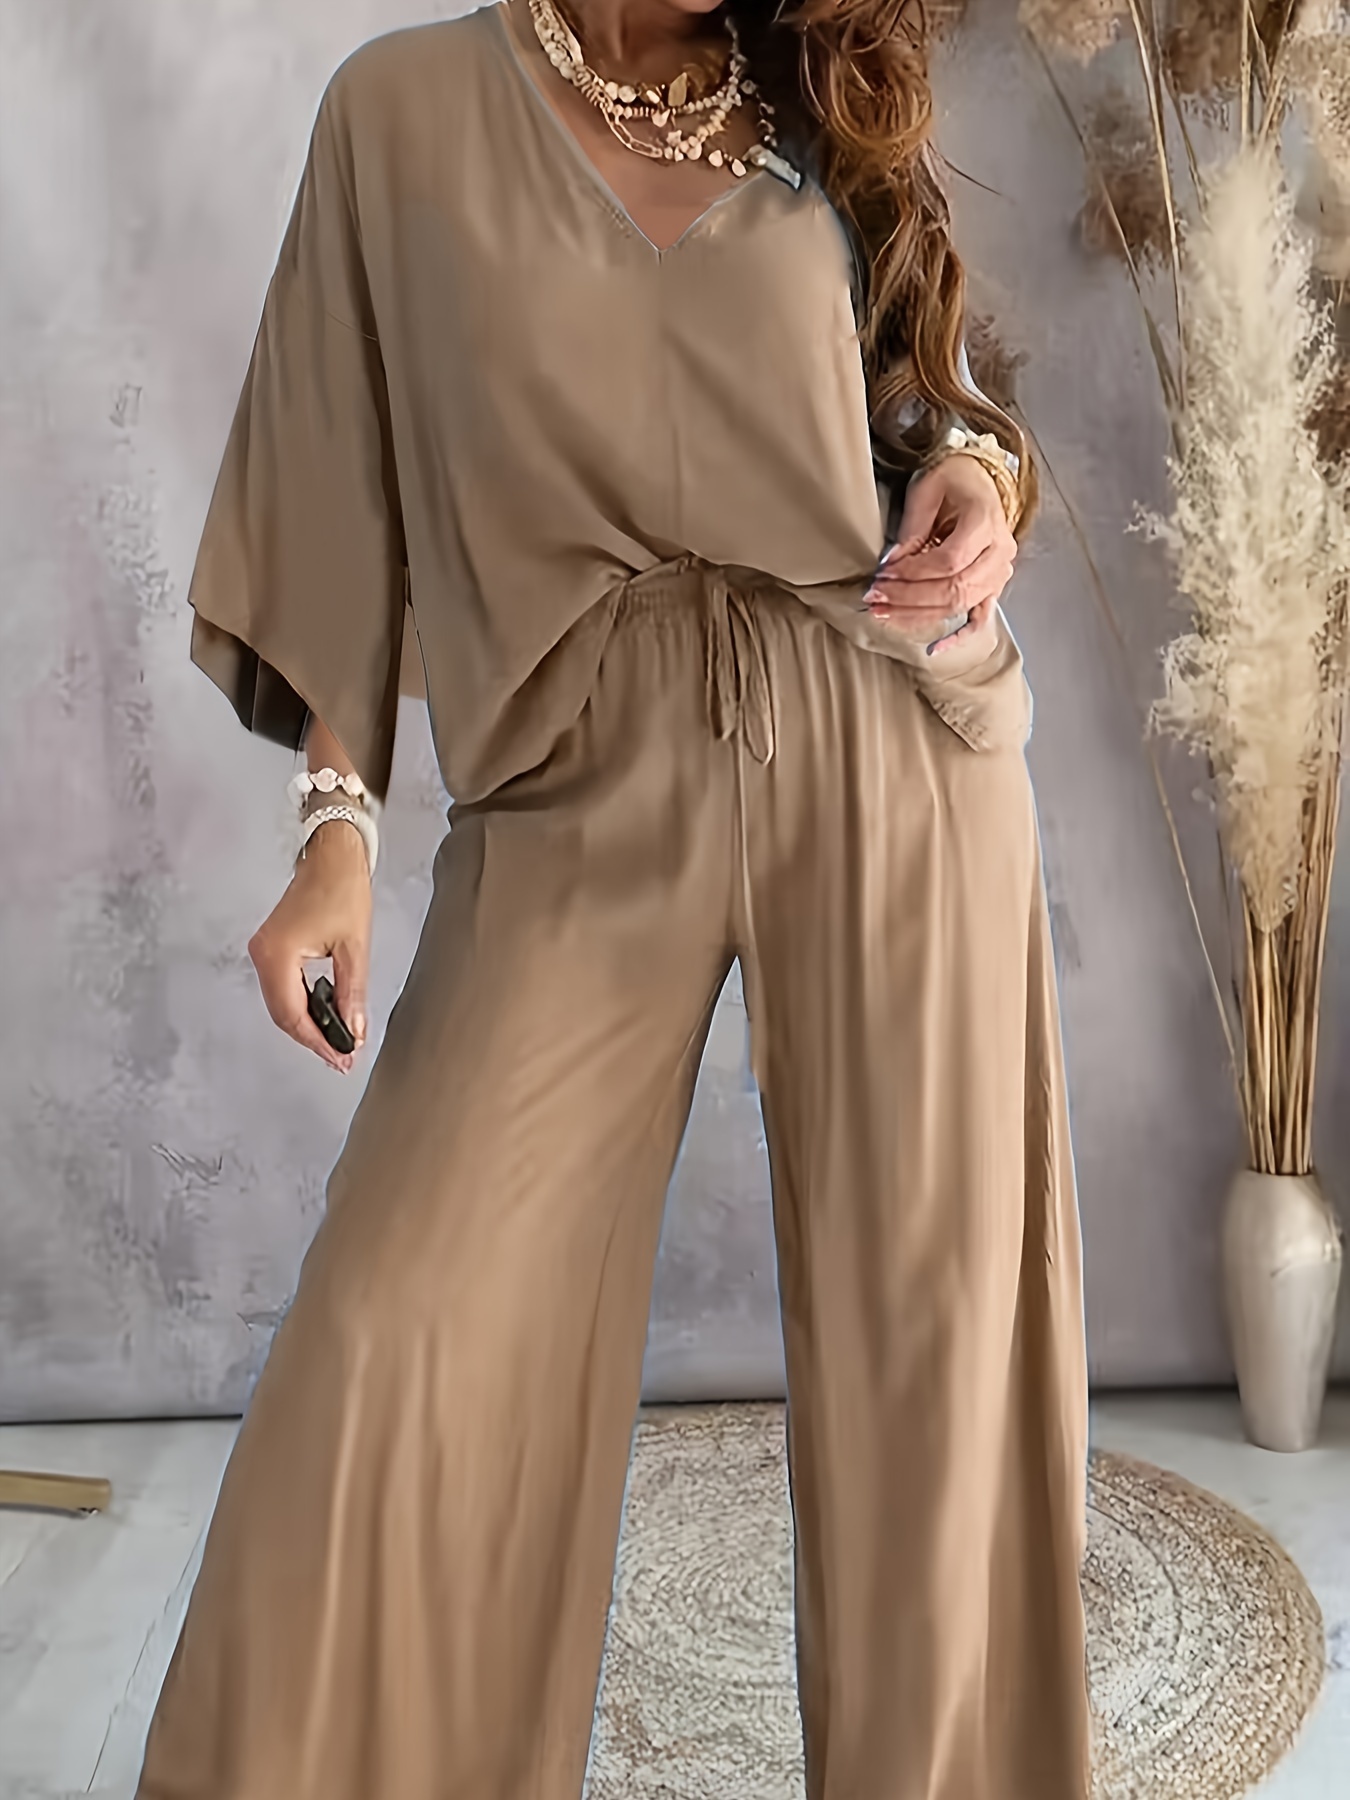 Women Two-piece Sets Plus Size Spring New Fashion Solid Color V-neck  Long-sleeved Tops Pants Suit Loose Casual Large Size Outfit - Plus Size  Sets - AliExpress